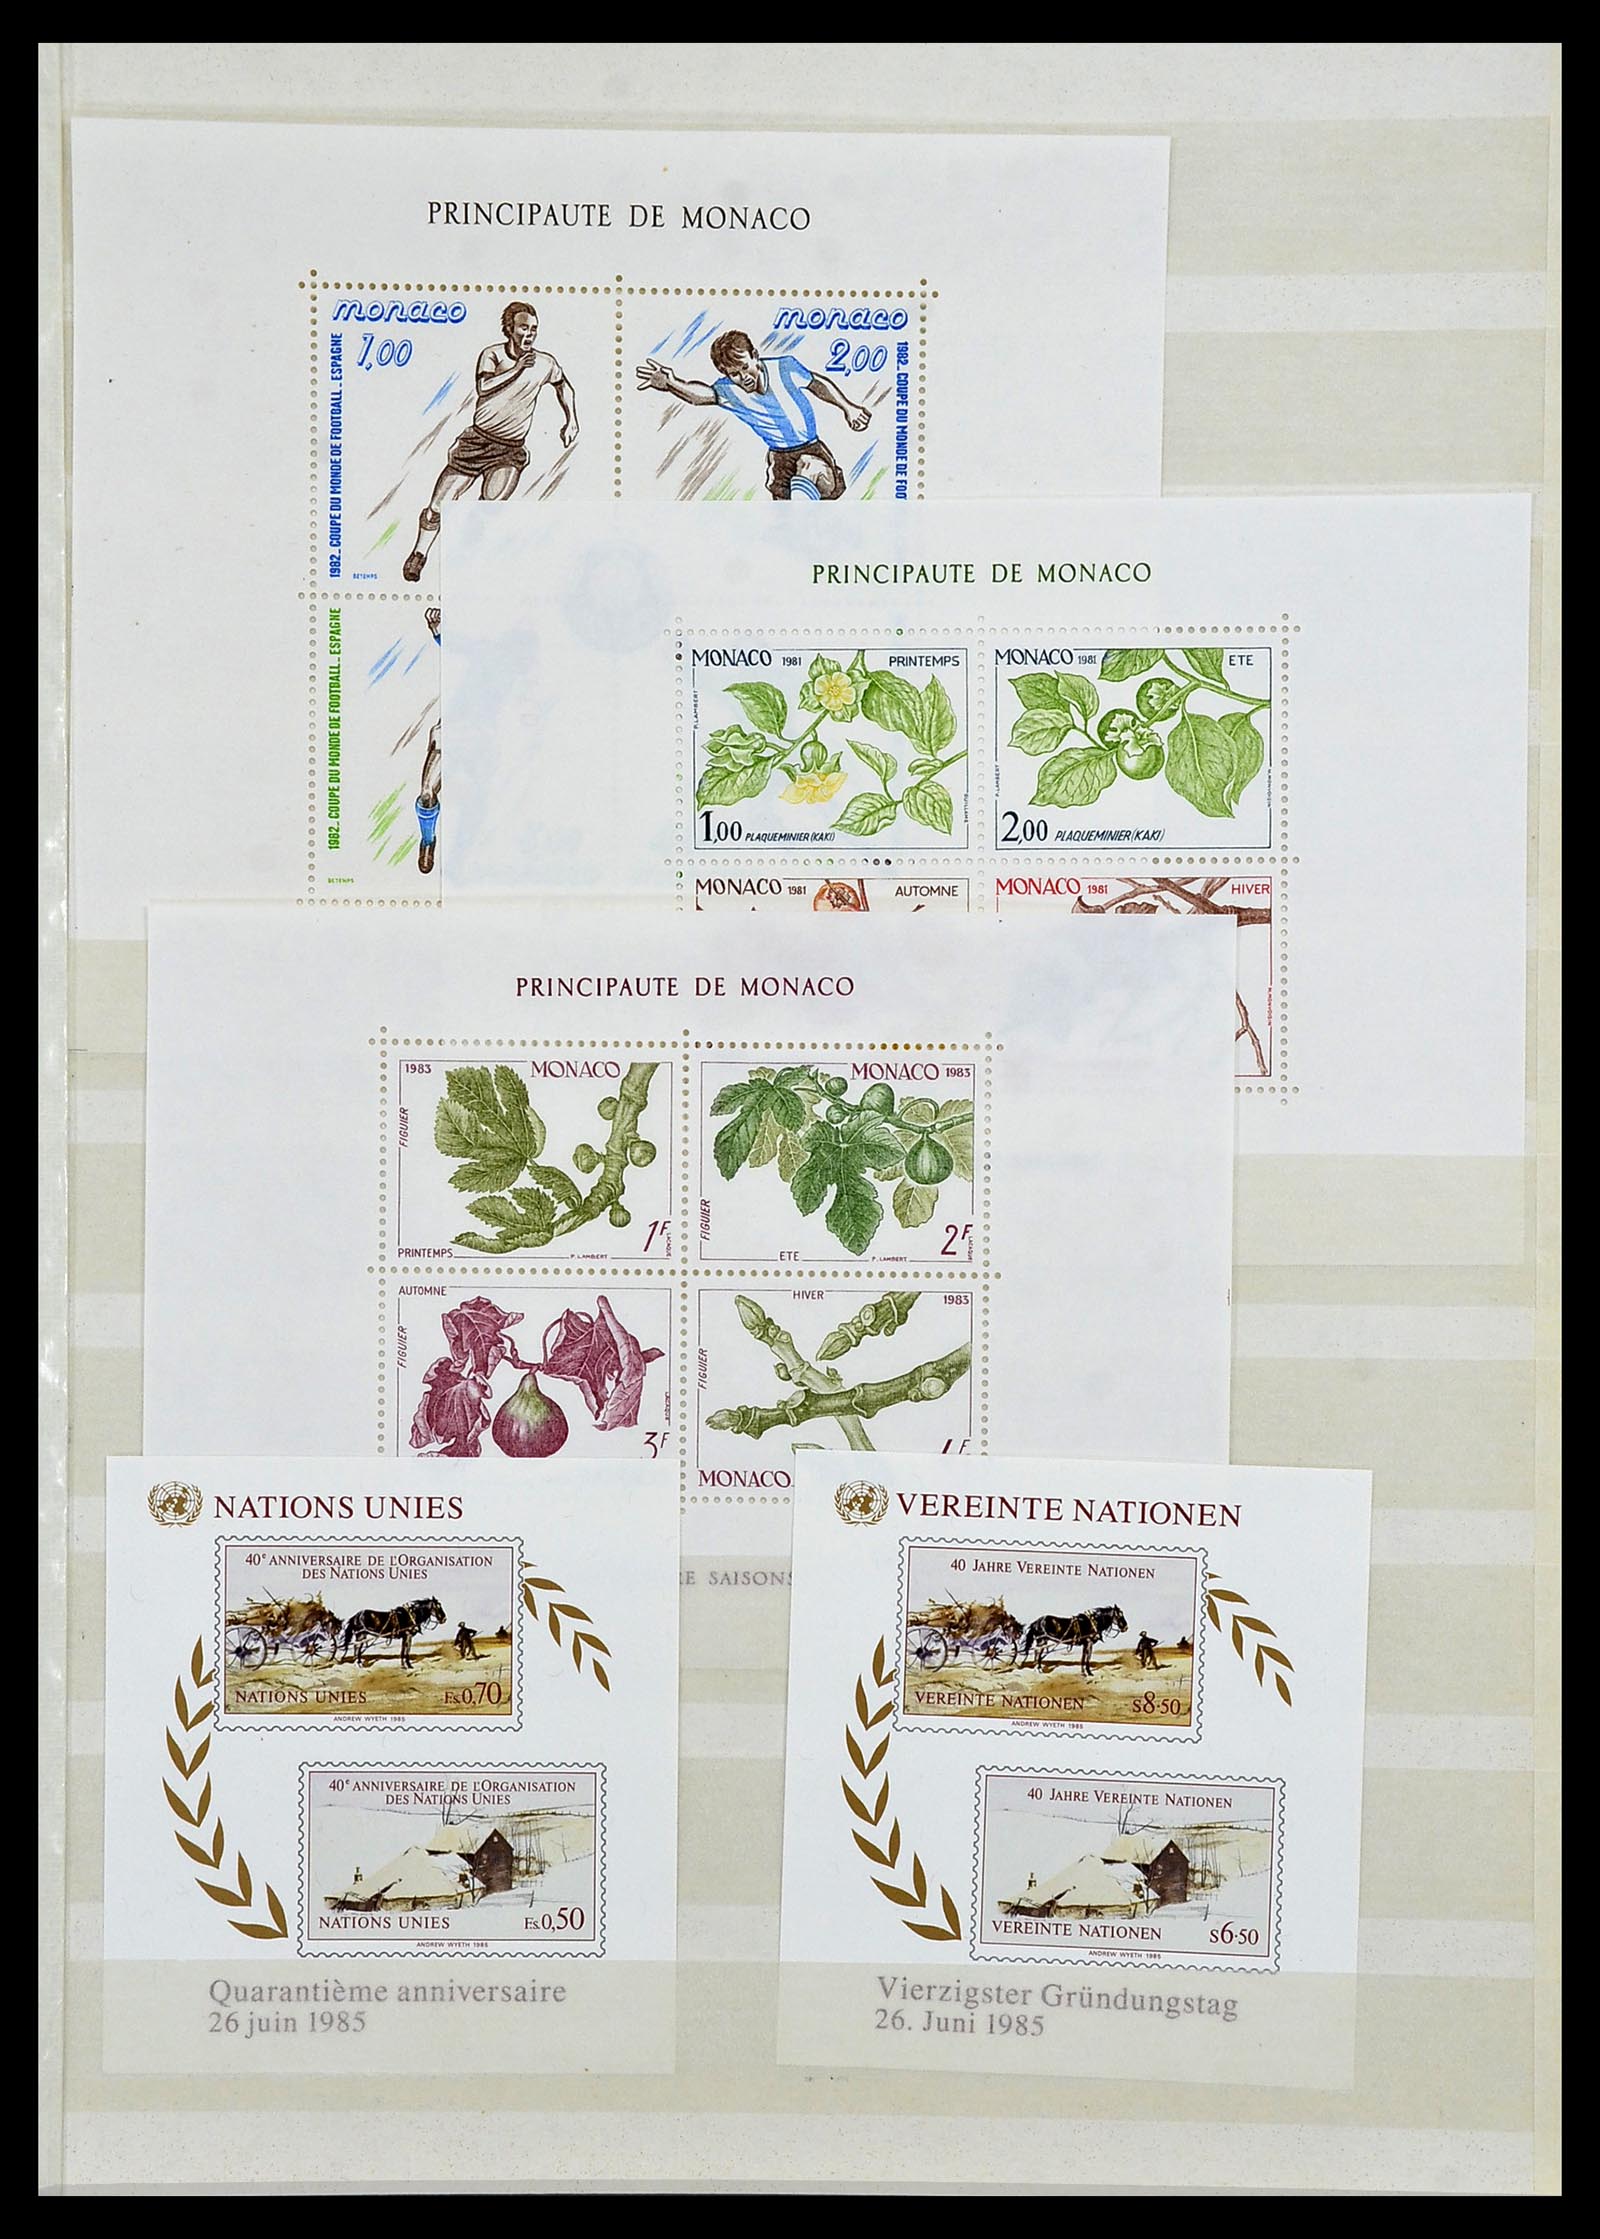 34045 003 - Stamp collection 34045 Western Europe souvenir sheets 1973-1986.